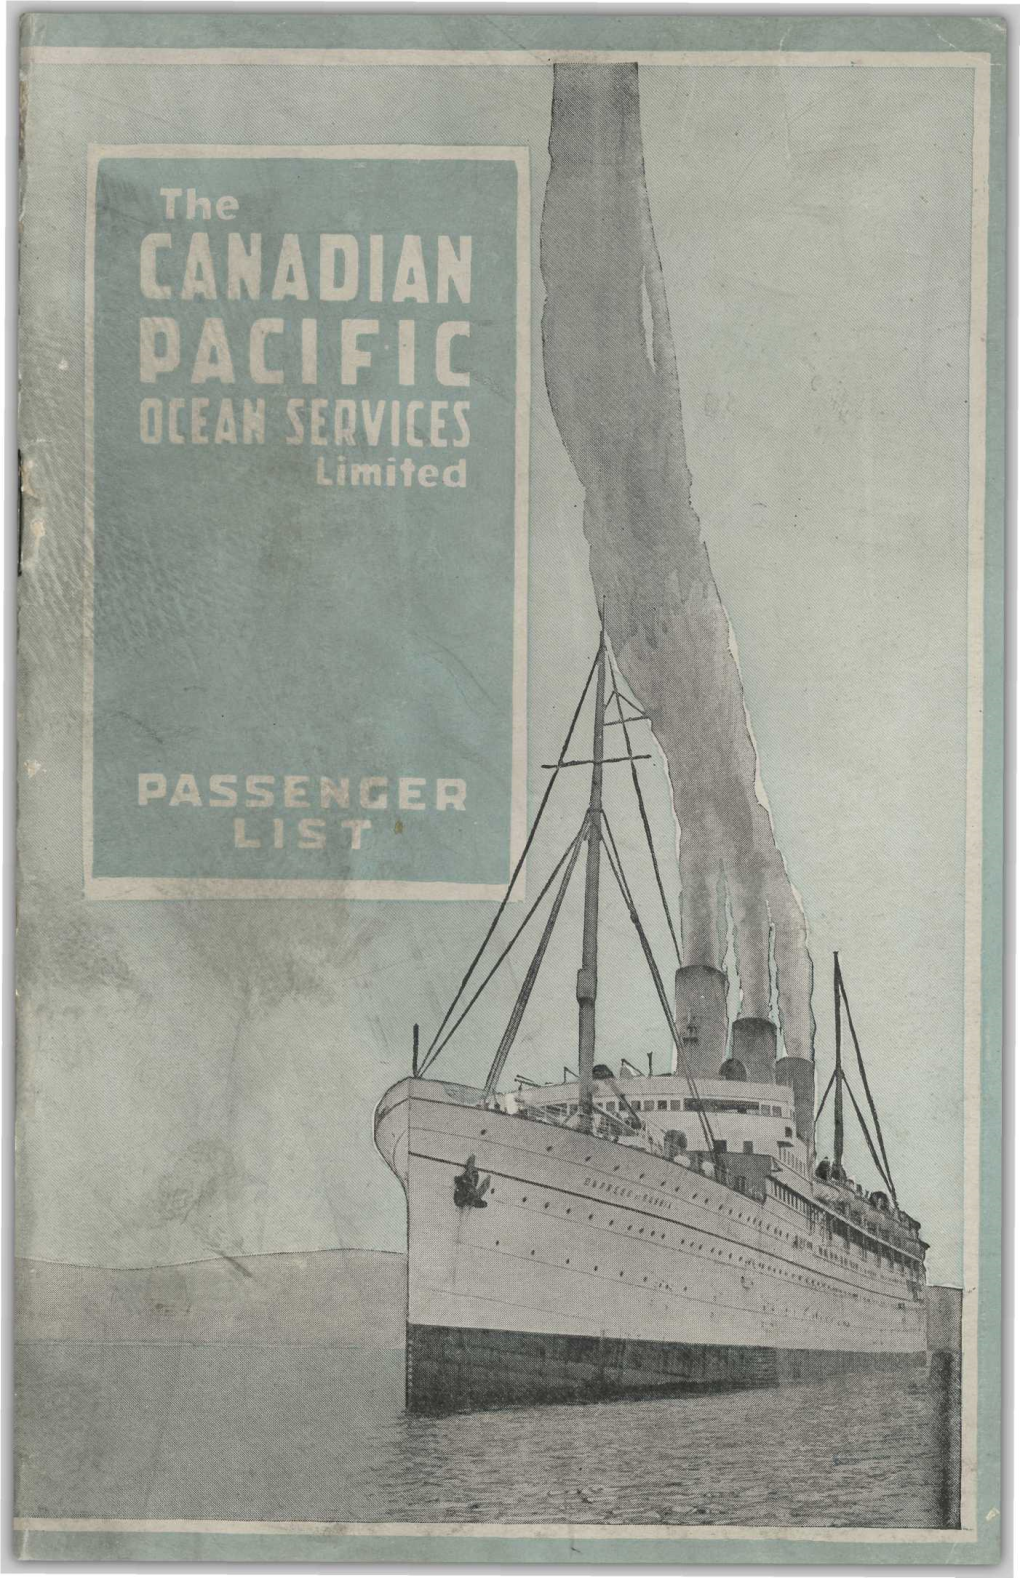 CANADIAN PACIFIC OCEAN SERVICES Imited